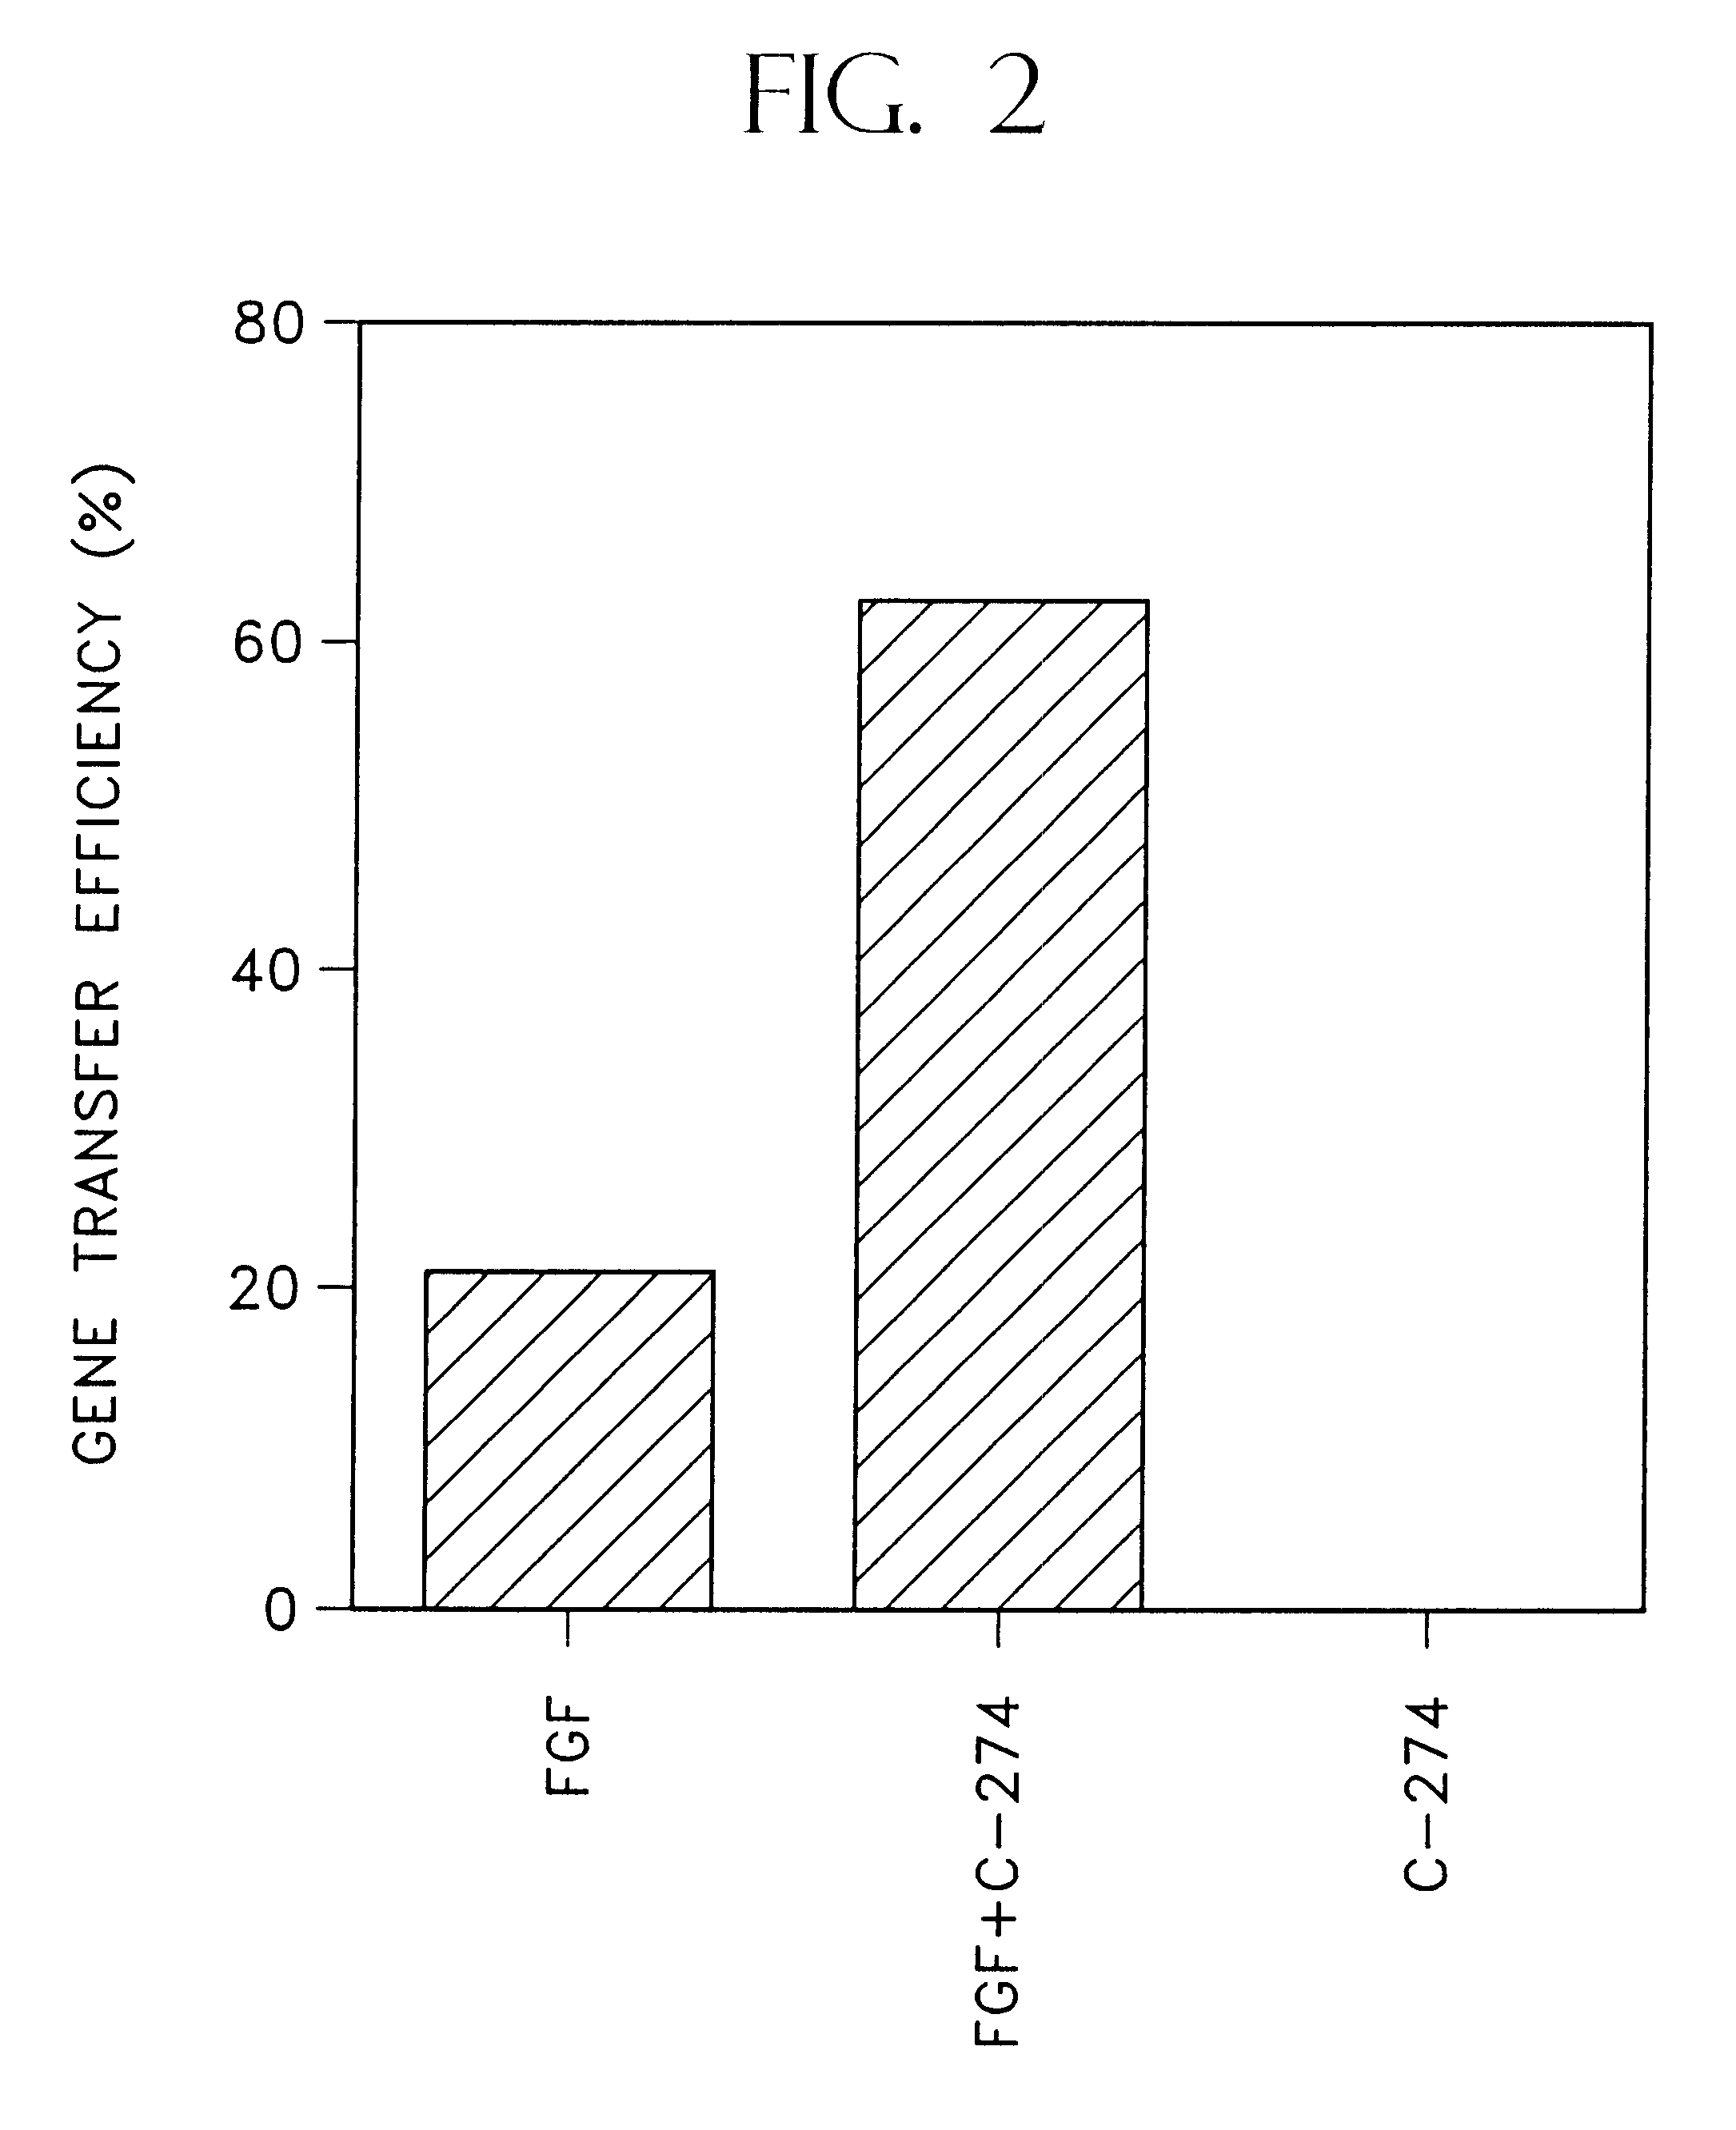 Methods for retroviral mediated gene transfer employing molecules, or mixtures thereof, containing retroviral binding domains and target cell binding domains